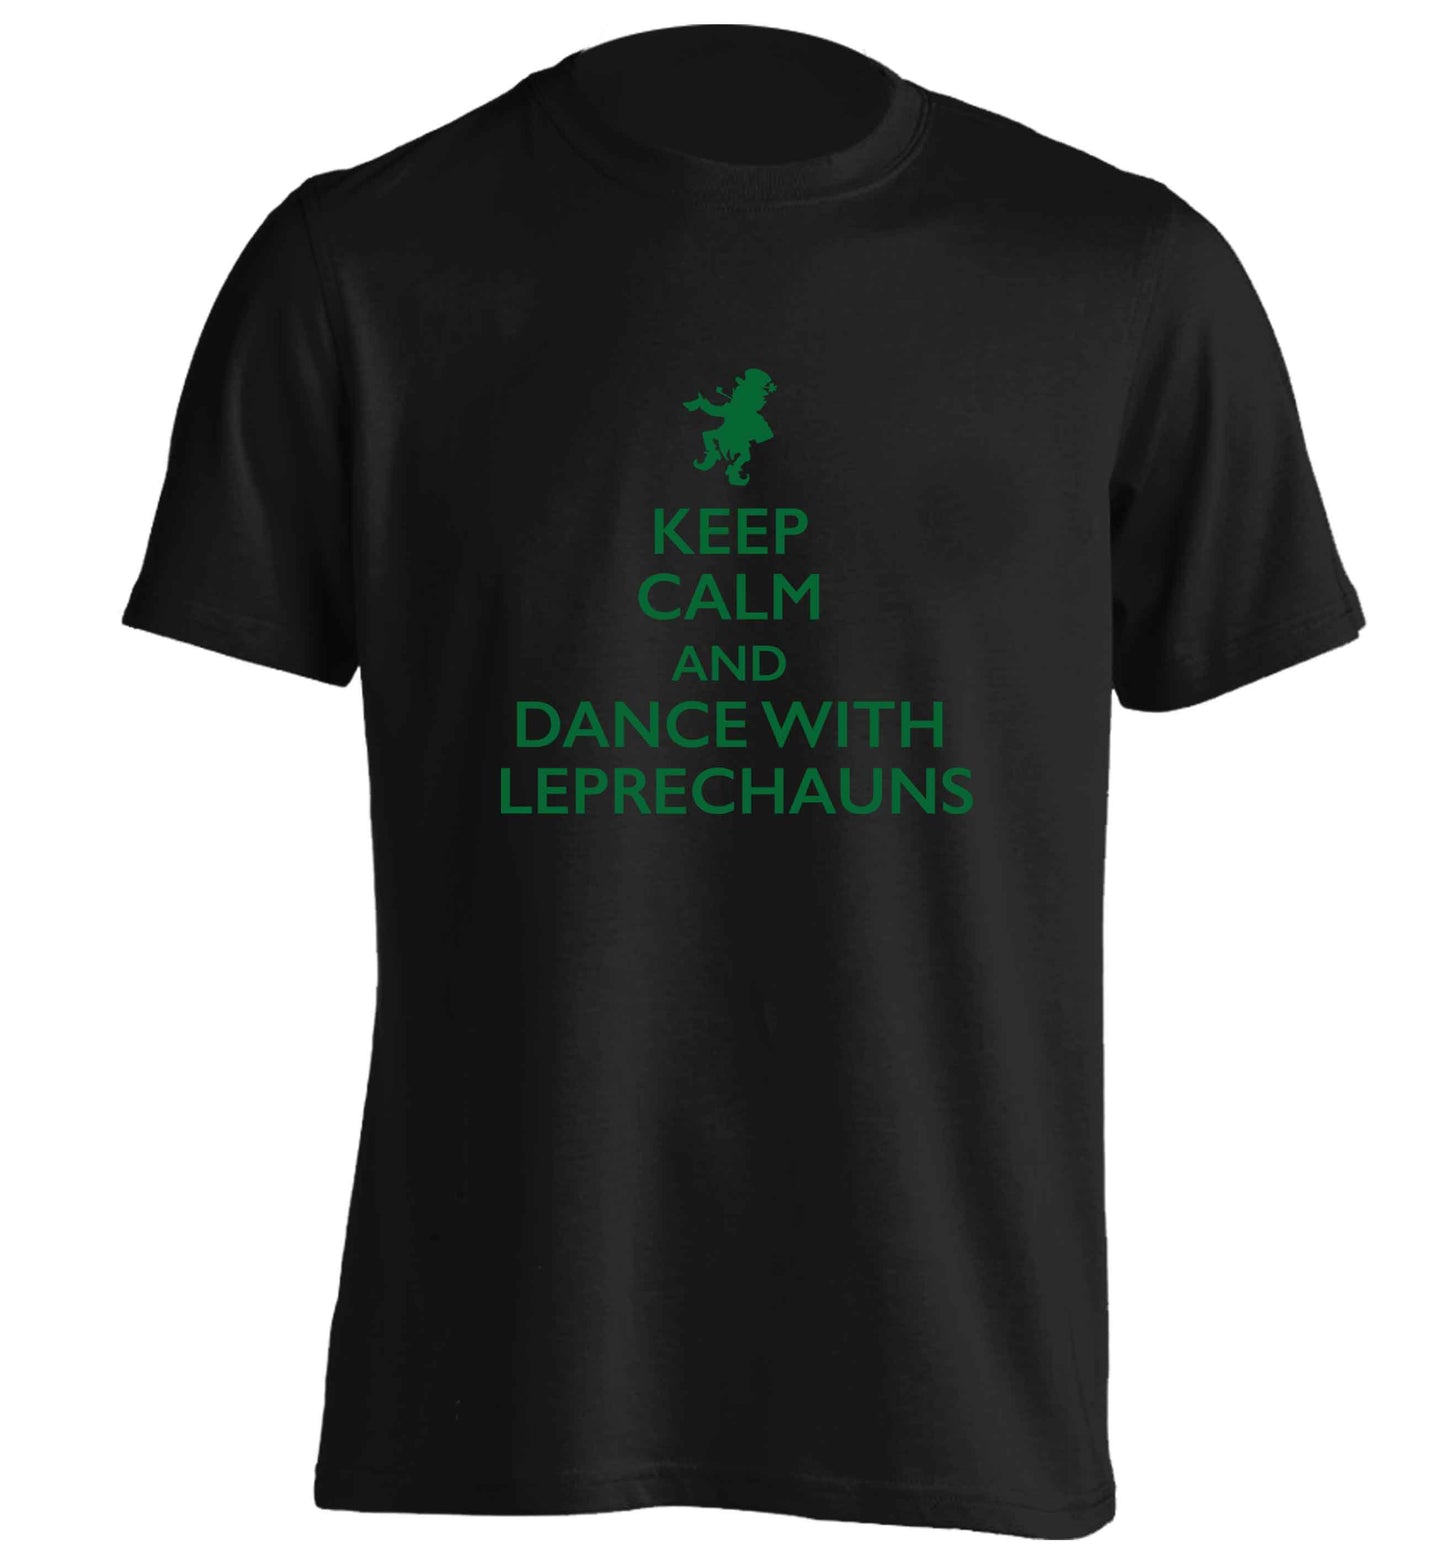 Keep calm and dance with leprechauns adults unisex black Tshirt 2XL